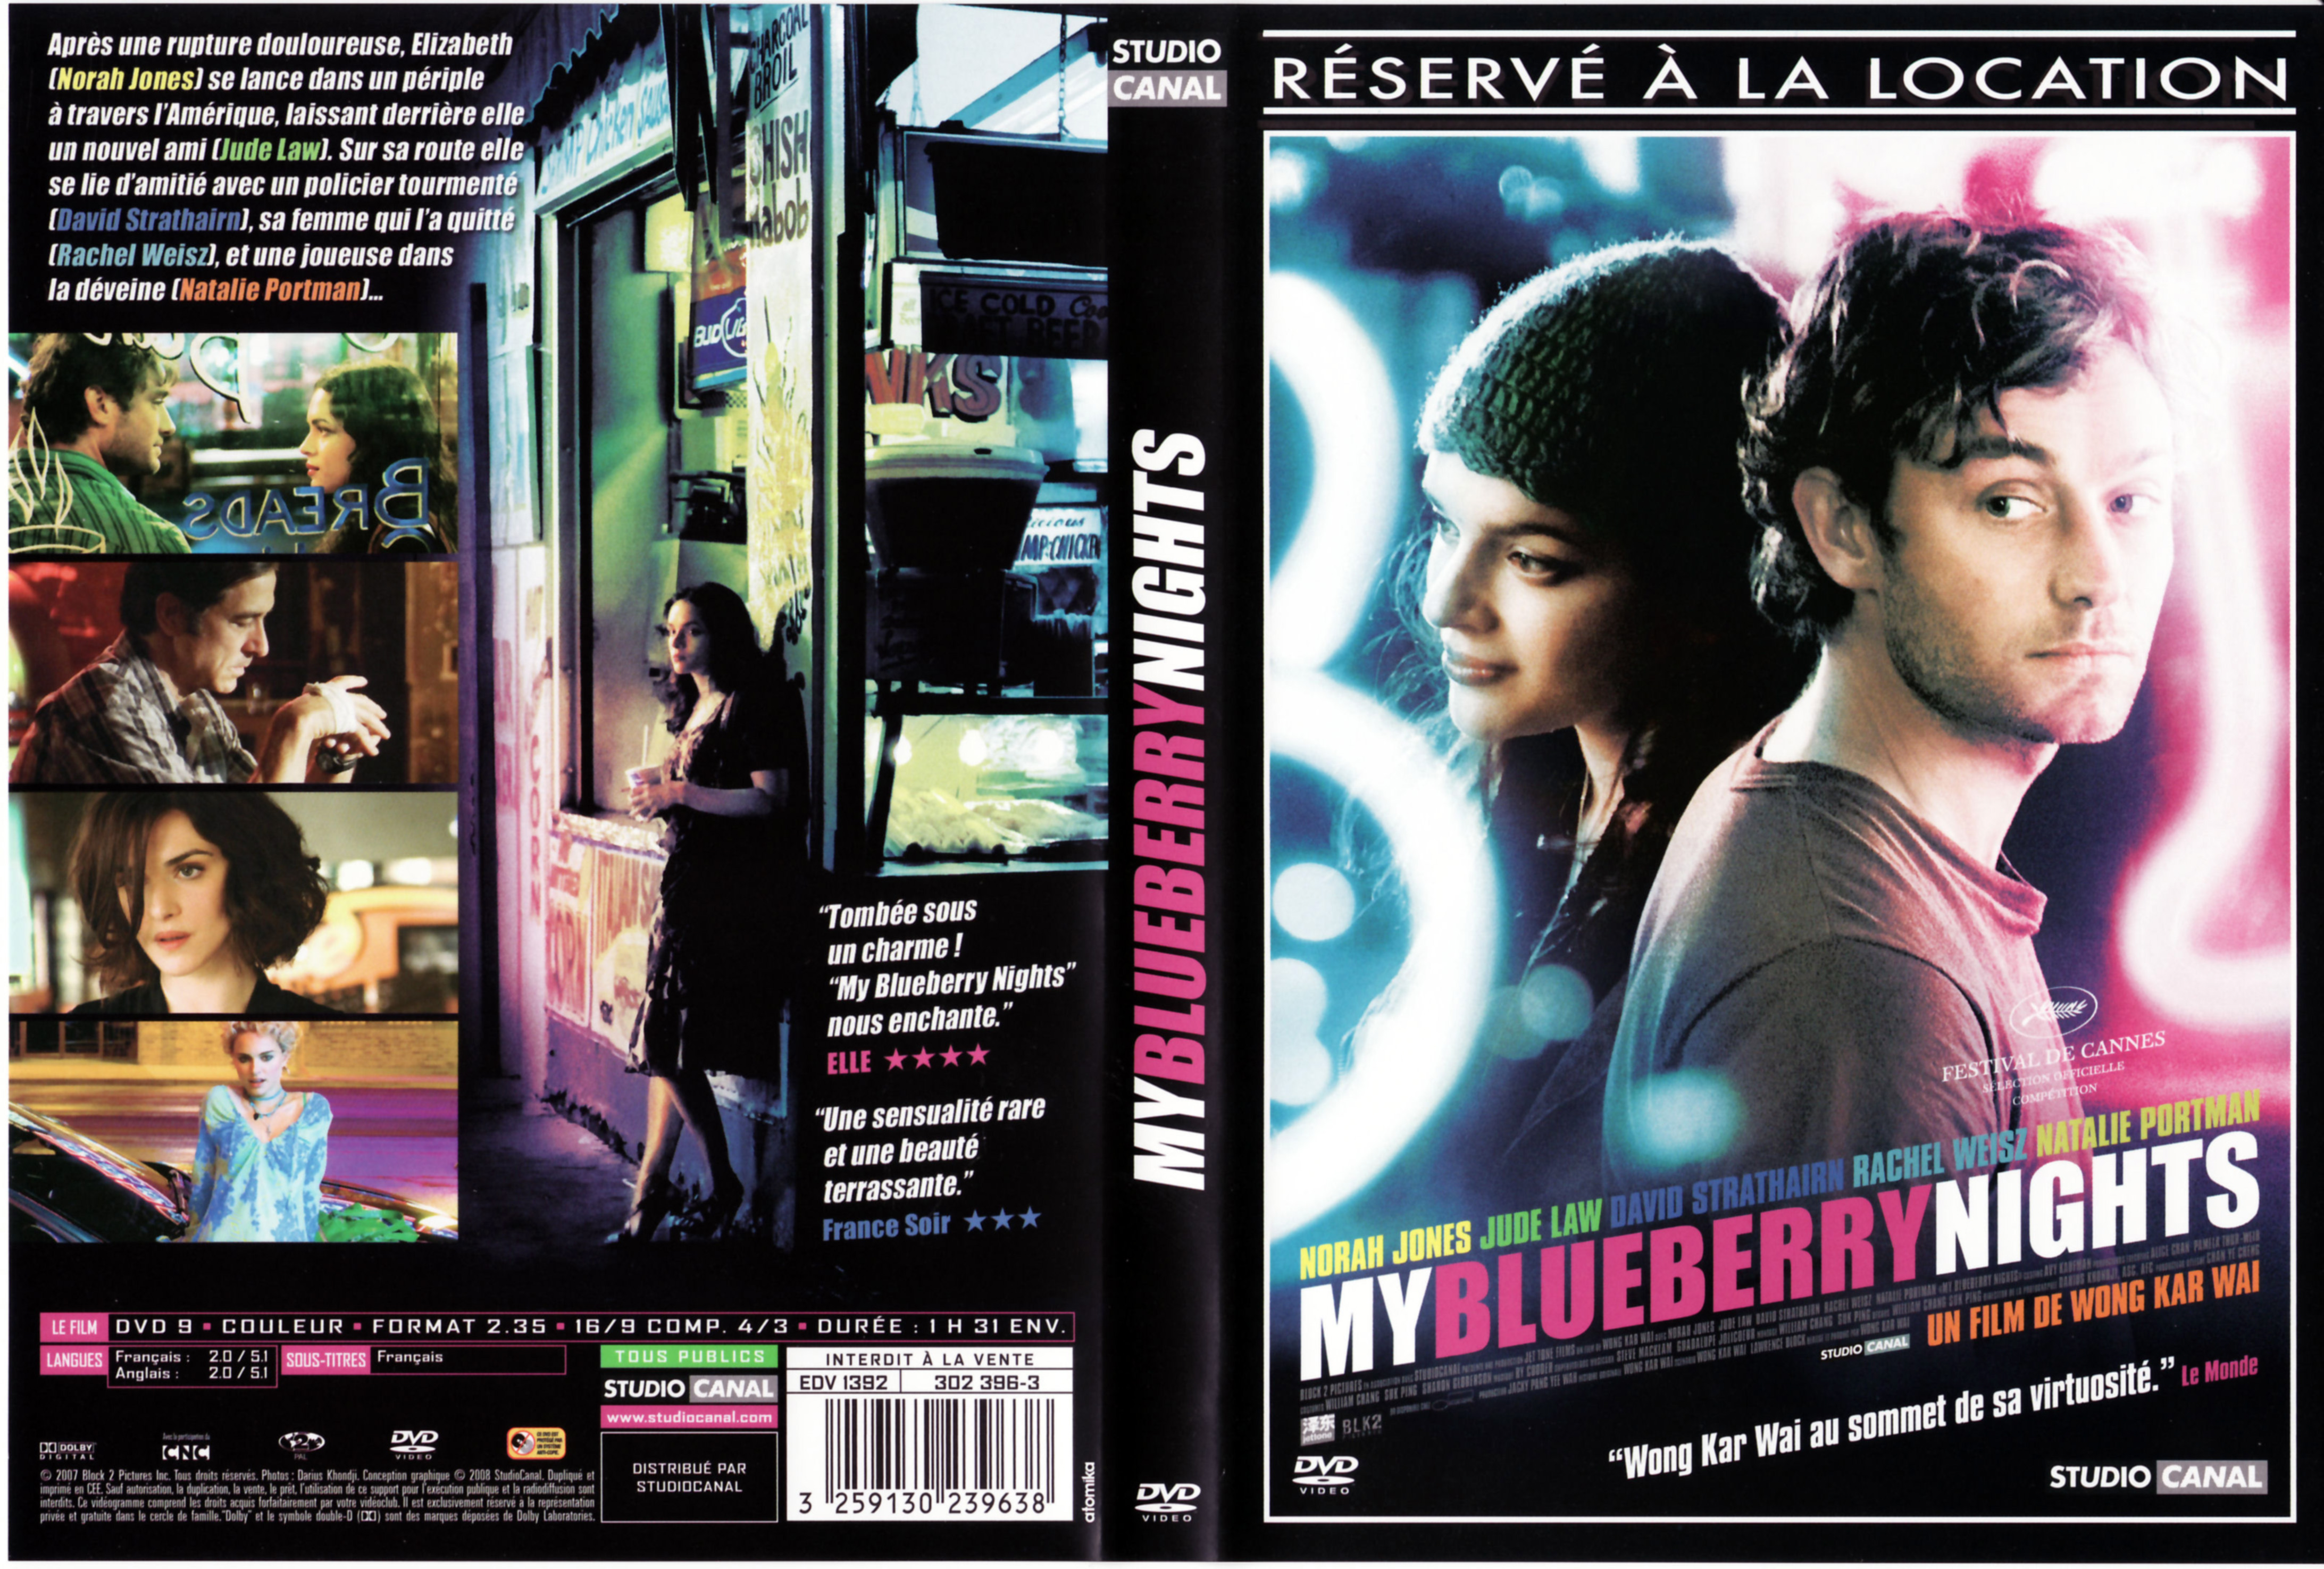 Jaquette DVD My blueberry nights